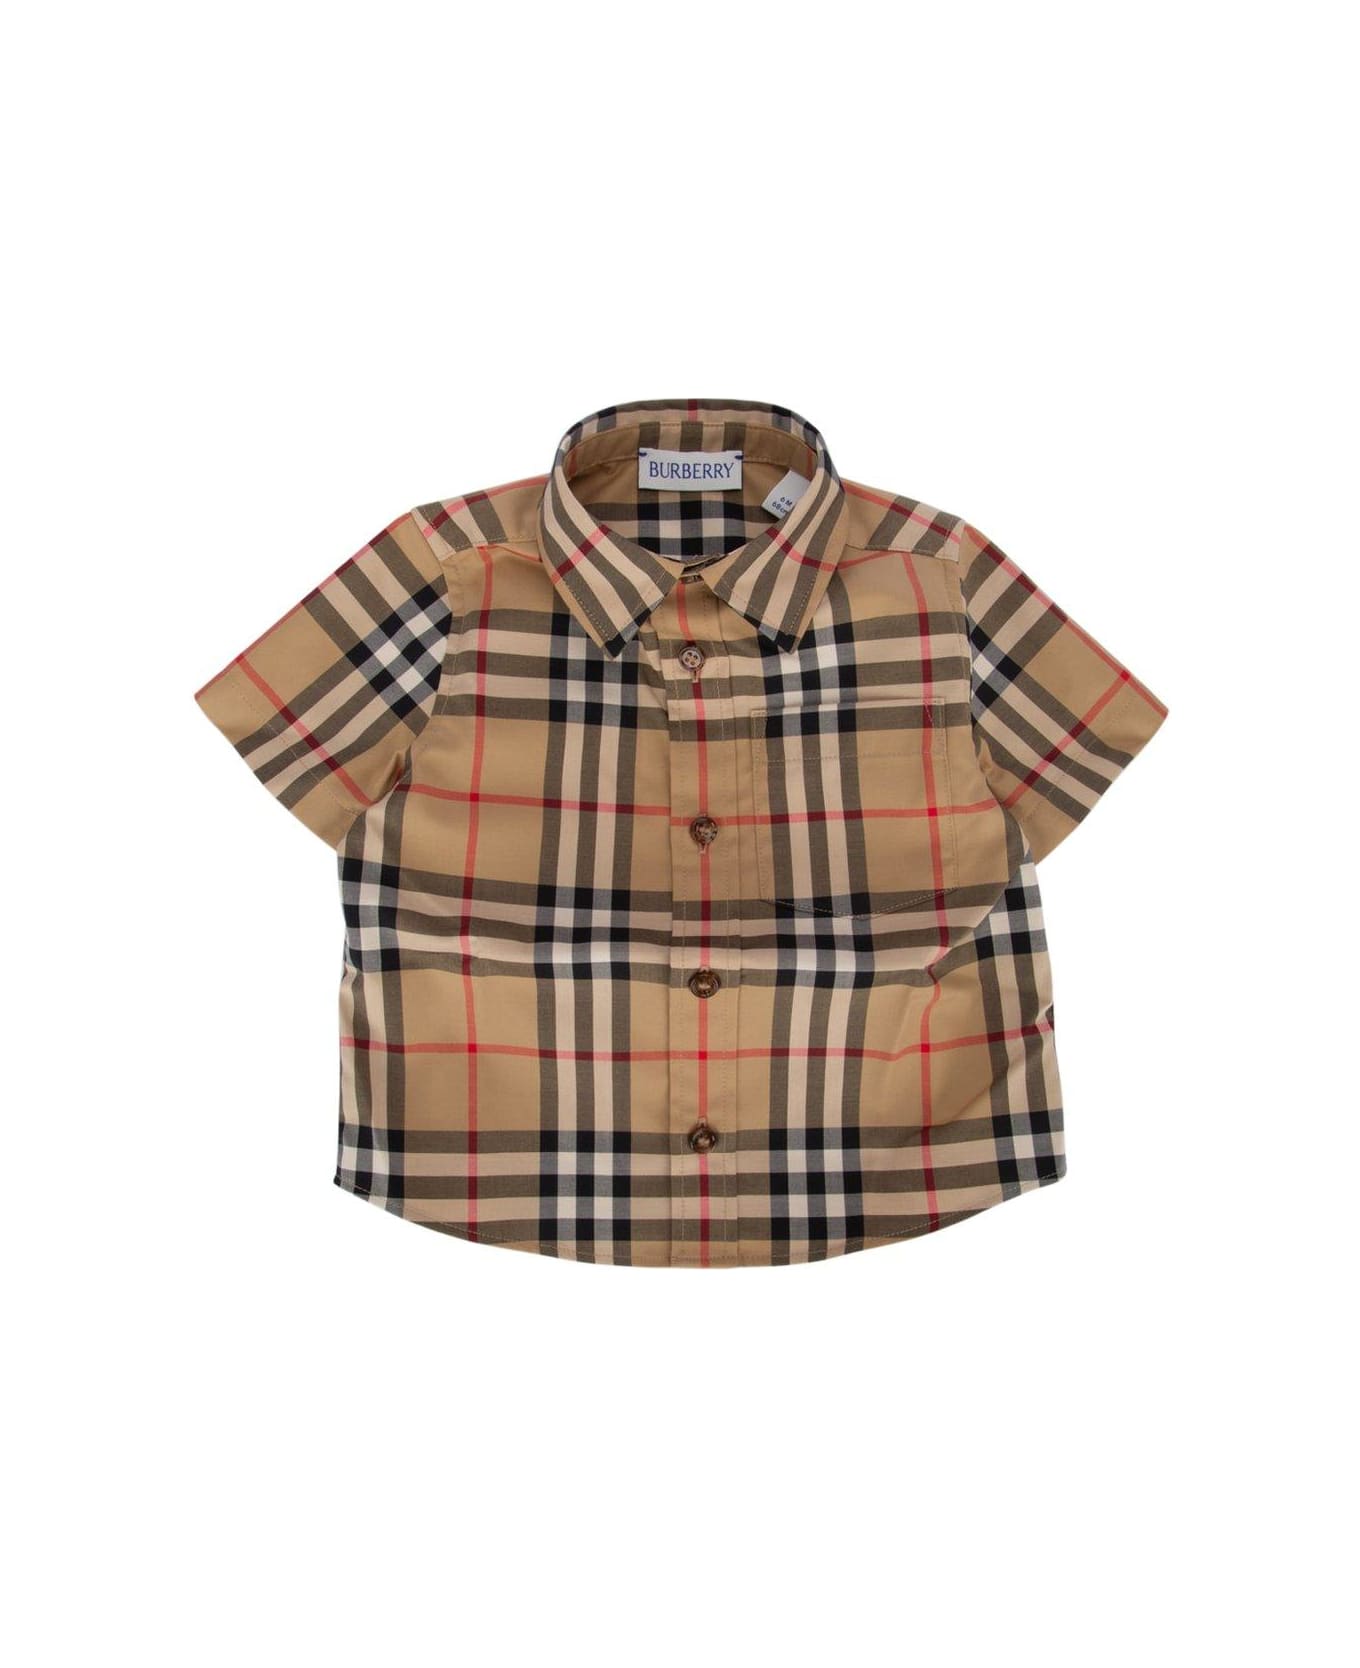 Burberry Check Pattern Short-sleeved Shirt - Archive beige ip chk